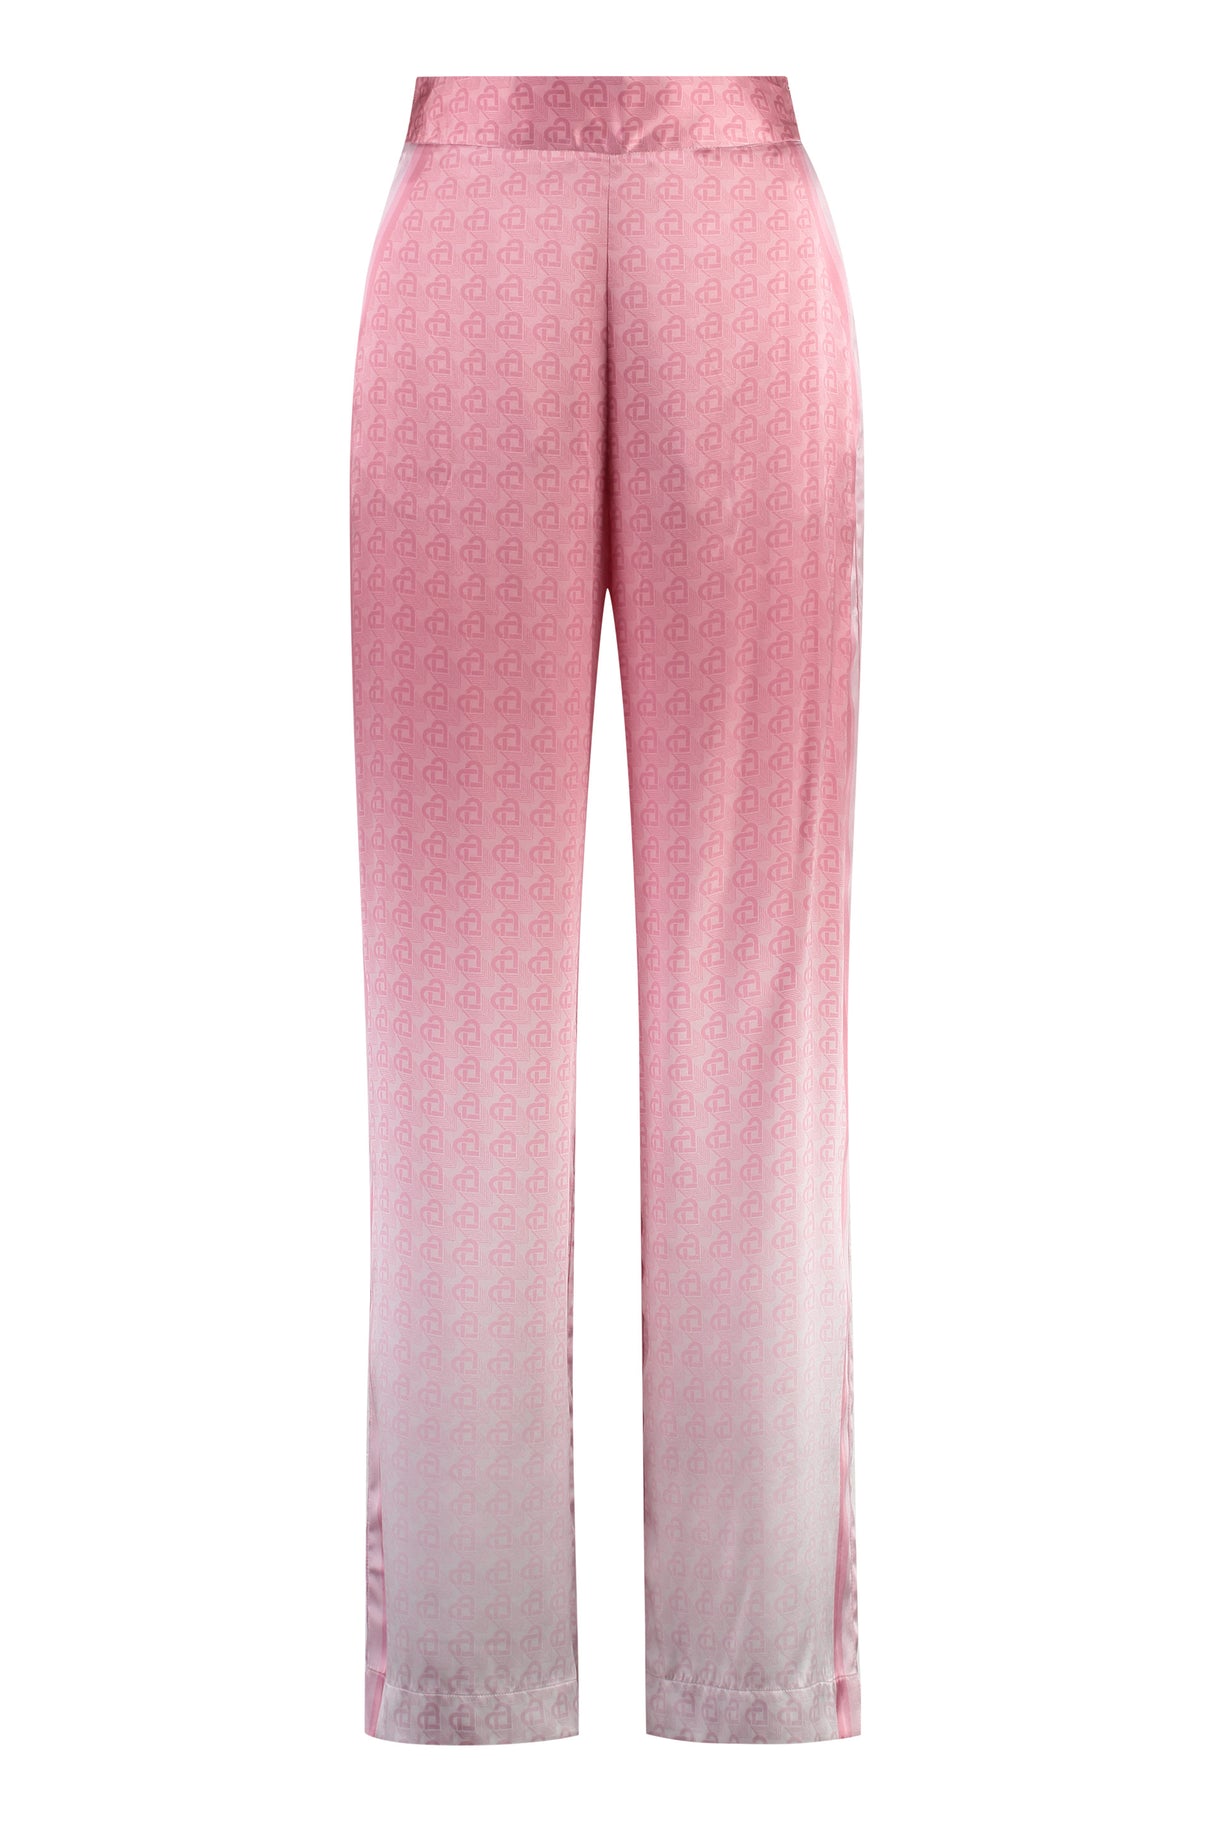 CASABLANCA Pink Printed Silk Pants for Women - FW23 Collection